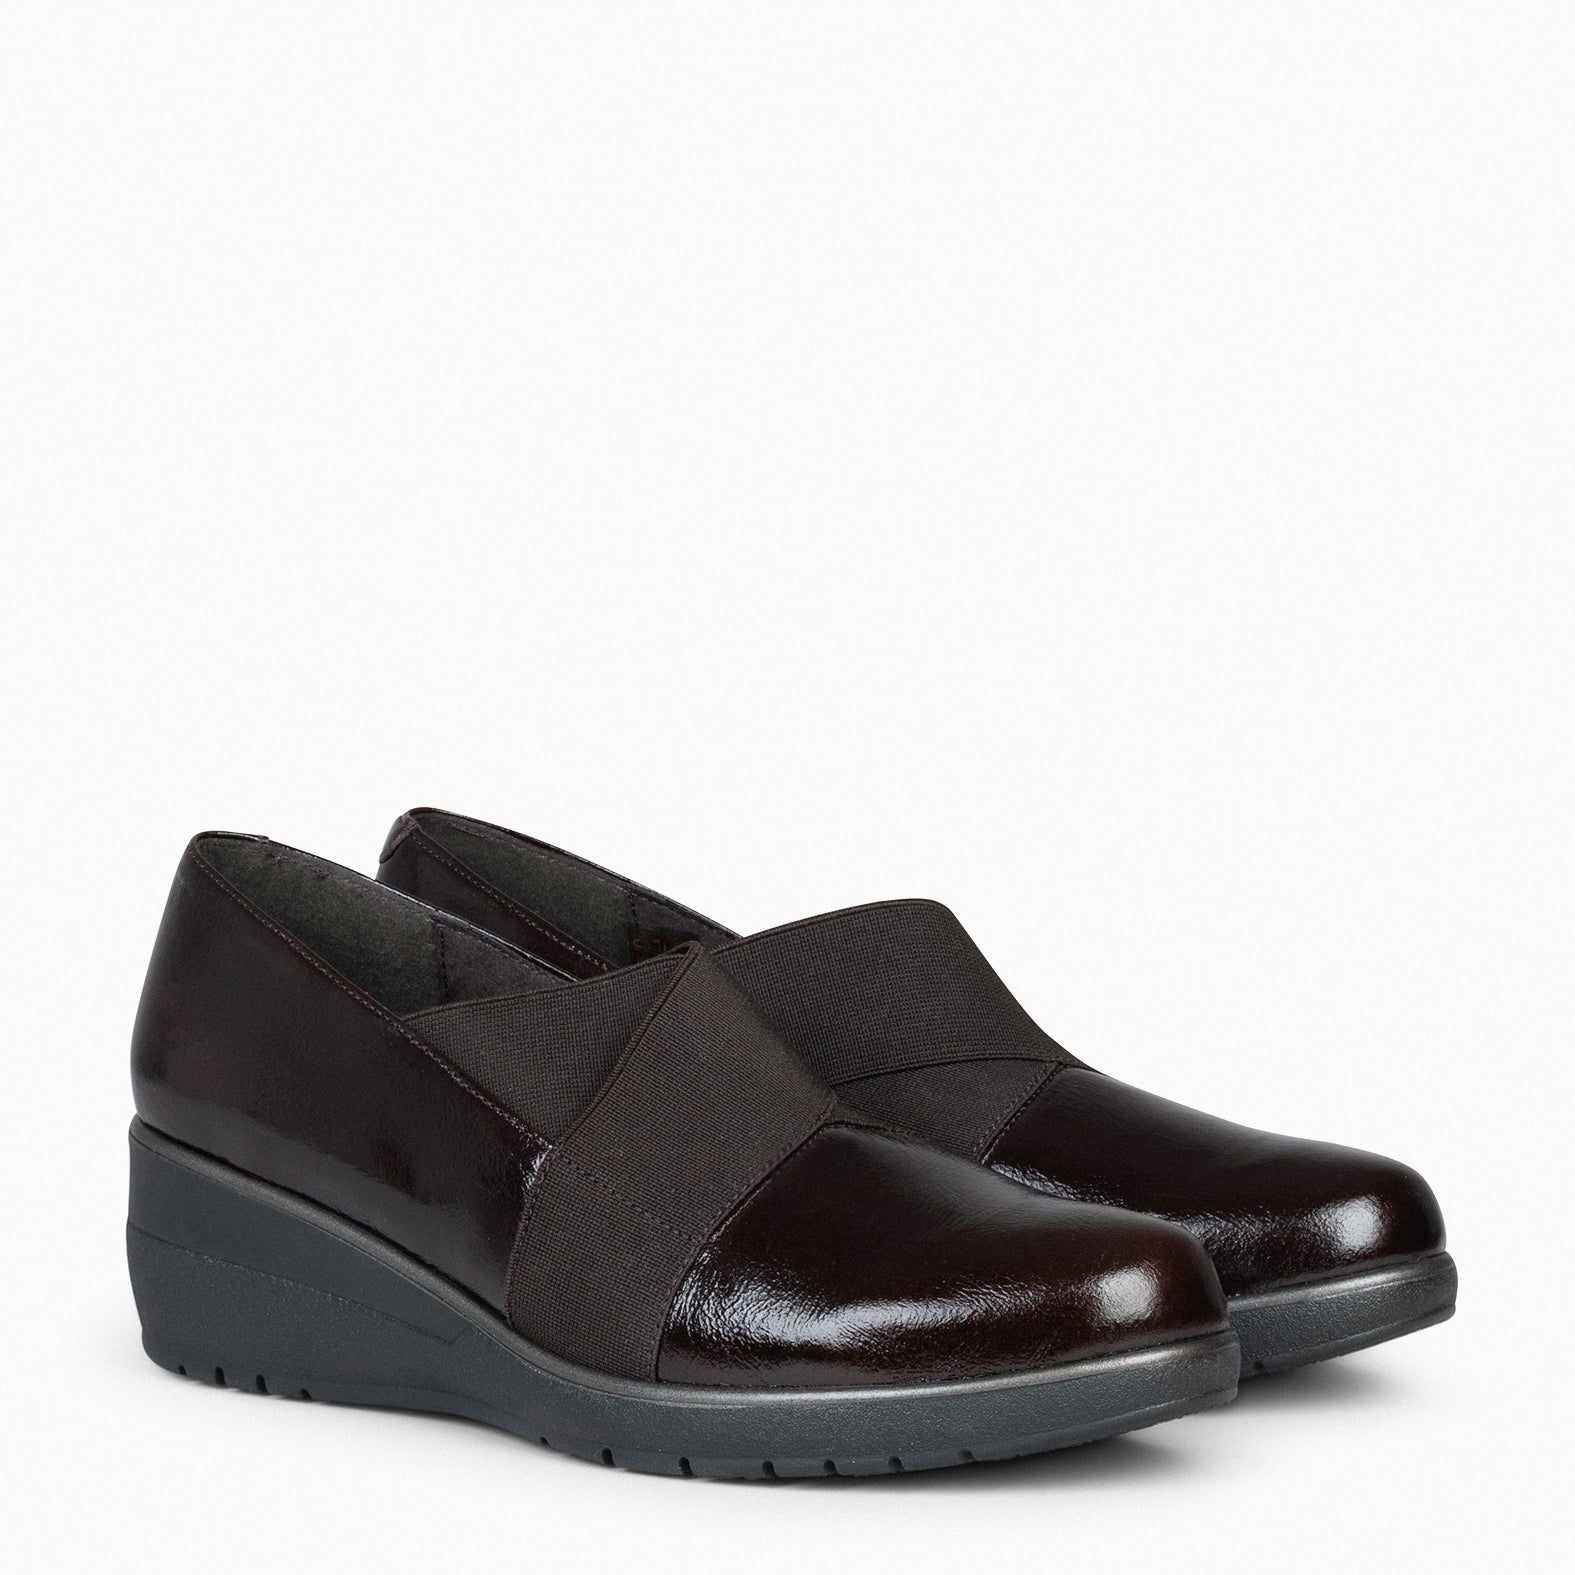 LIA - BROWN Wedge shoes with elastic straps 